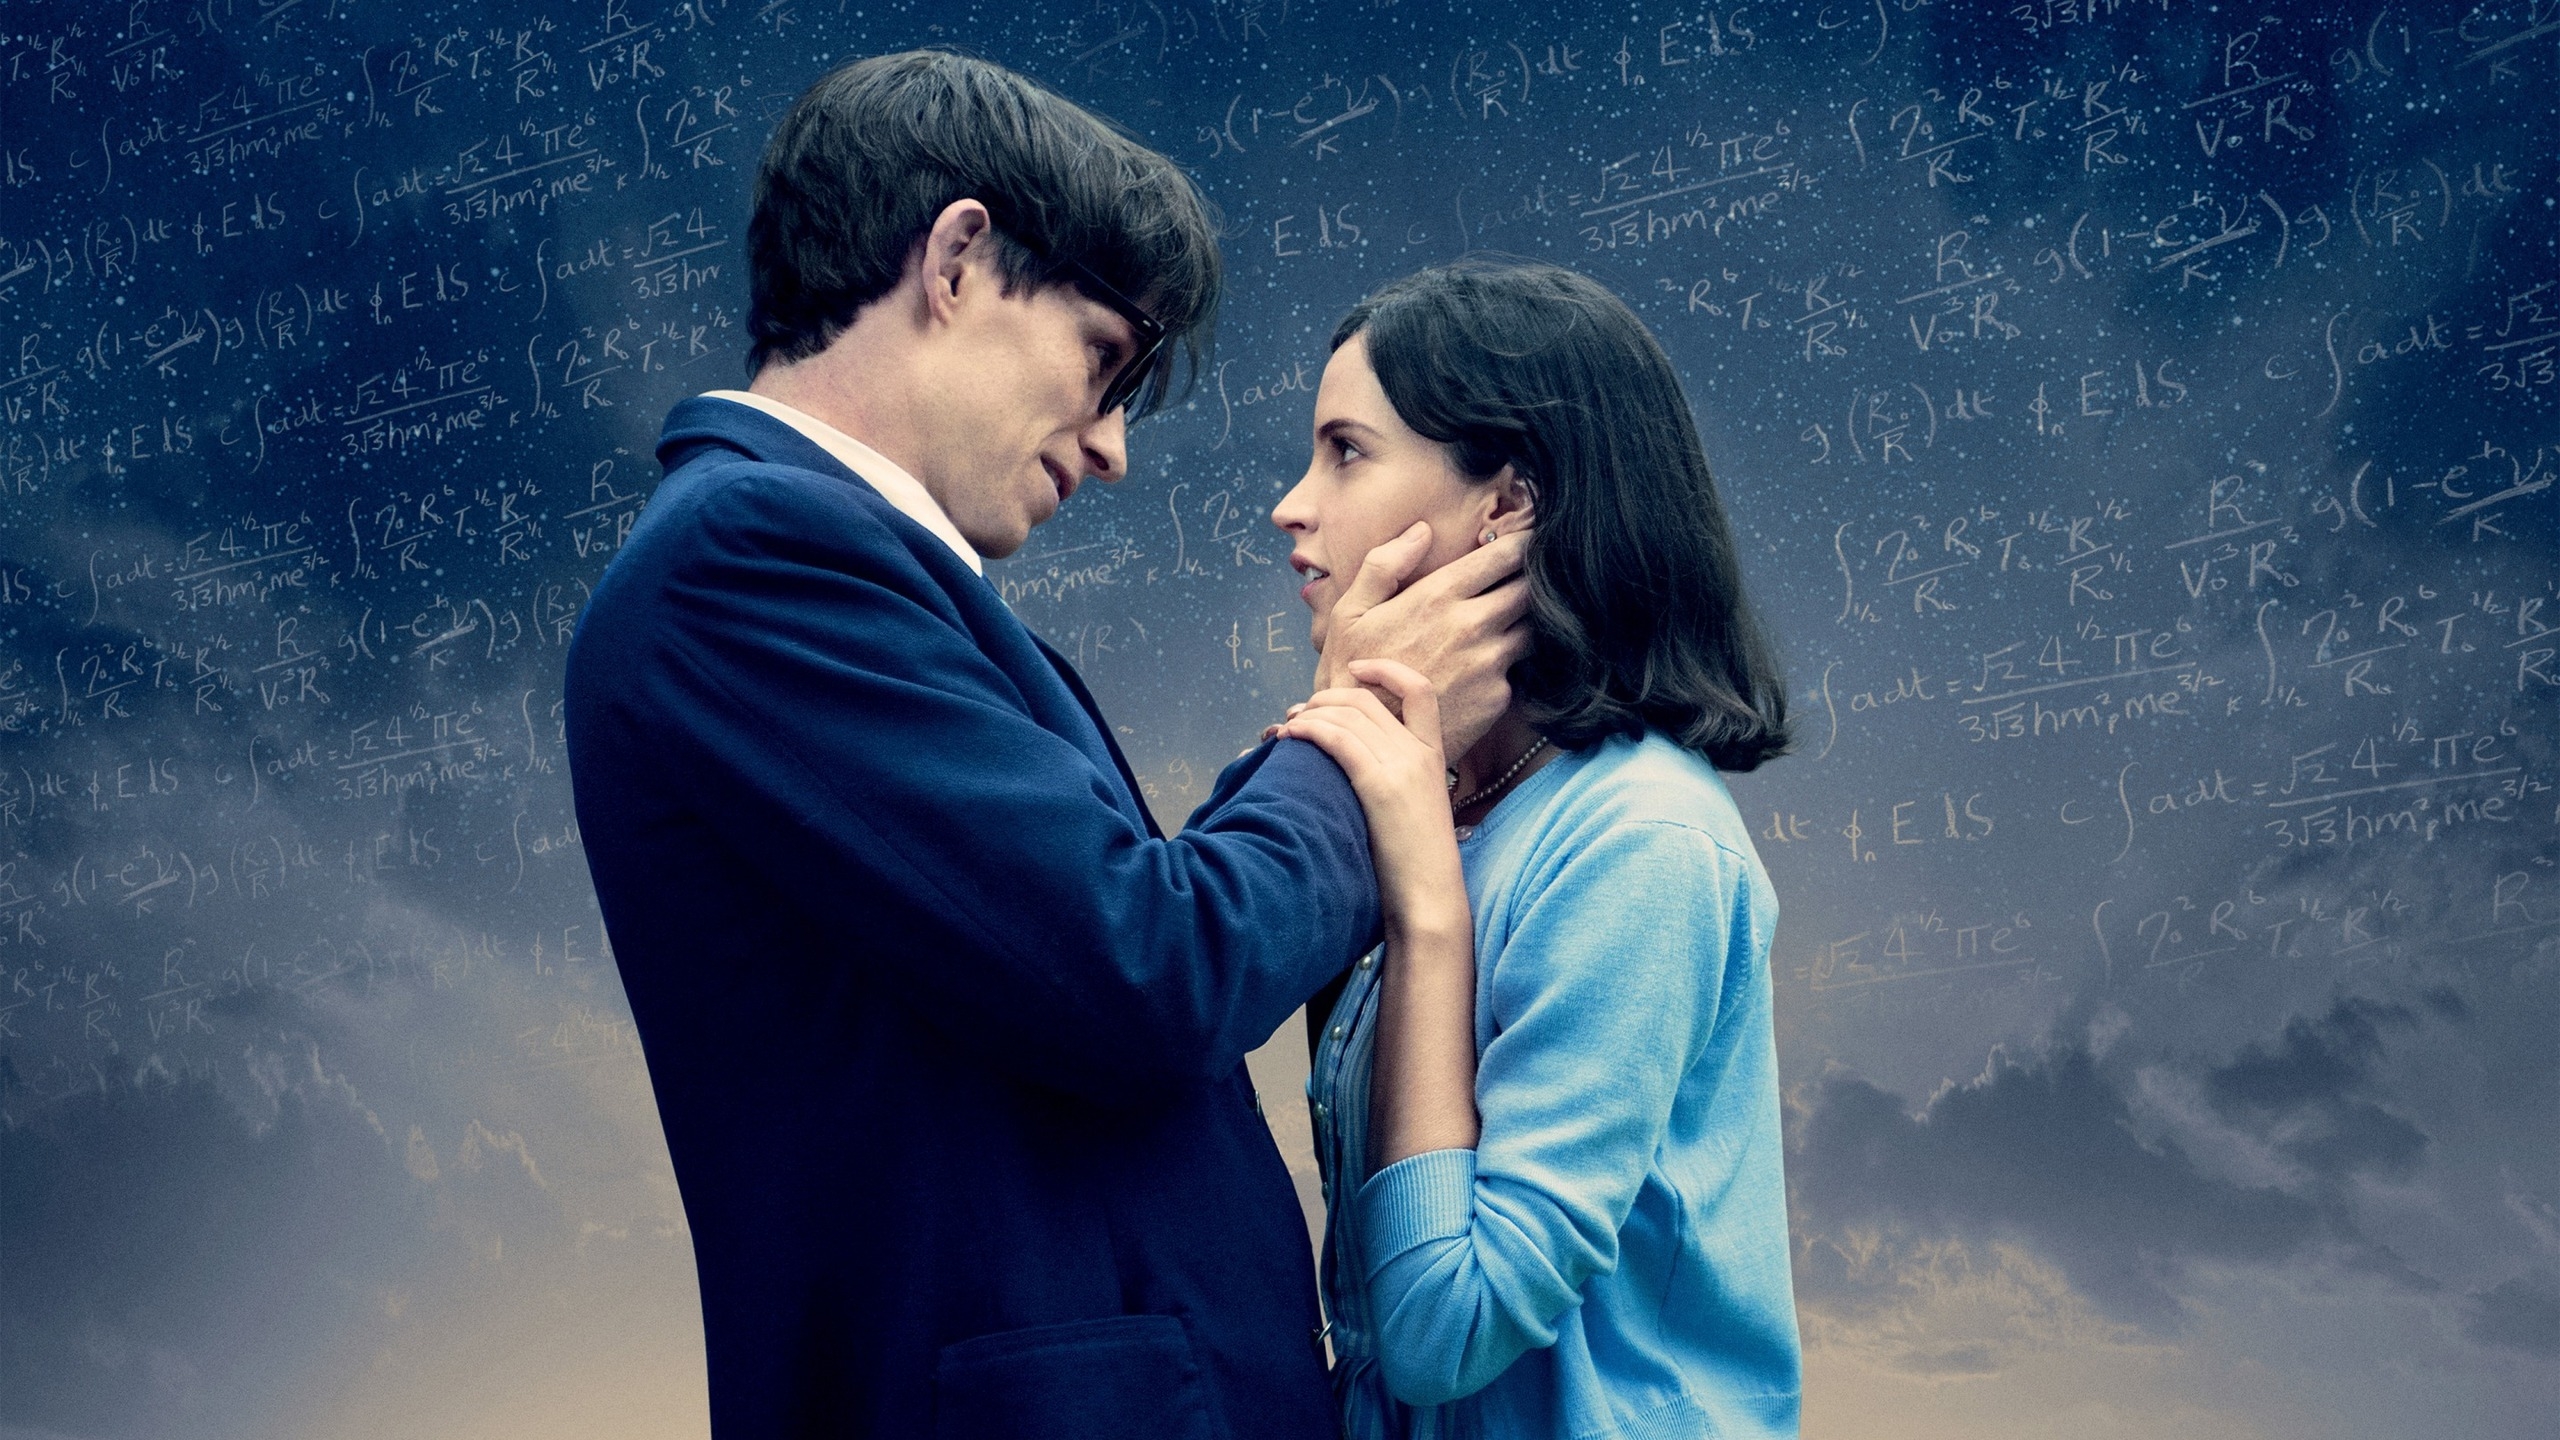 The Theory of Everything for 2560x1440 HDTV resolution